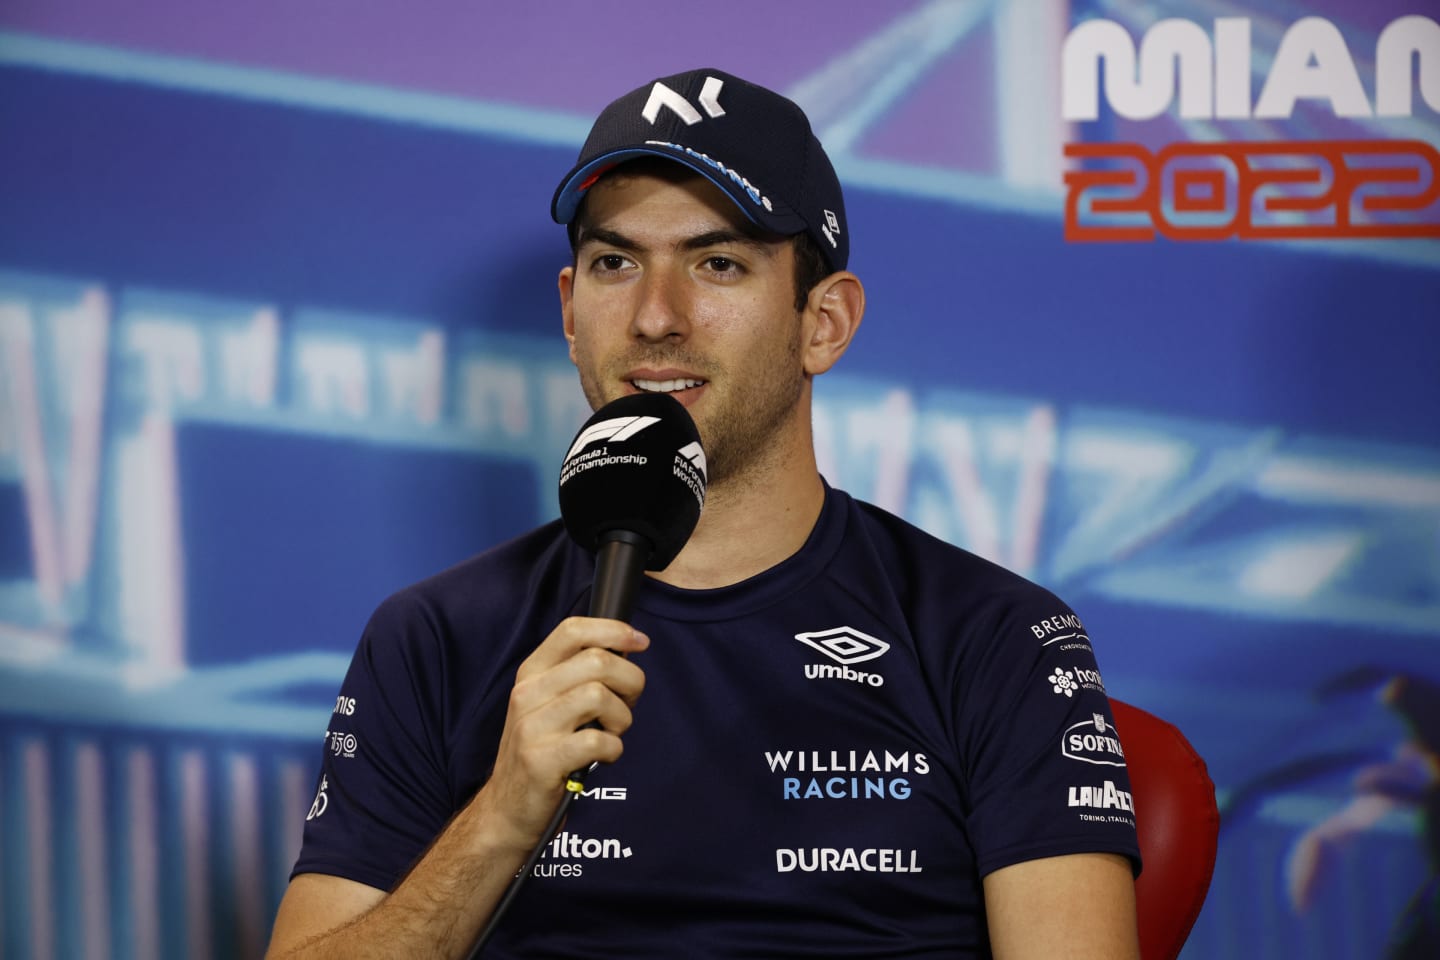 MIAMI, FLORIDA - MAY 06: Nicholas Latifi of Canada and Williams talks in the Drivers Press Conference prior to practice ahead of the F1 Grand Prix of Miami at the Miami International Autodrome on May 06, 2022 in Miami, Florida. (Photo by Jared C. Tilton/Getty Images)